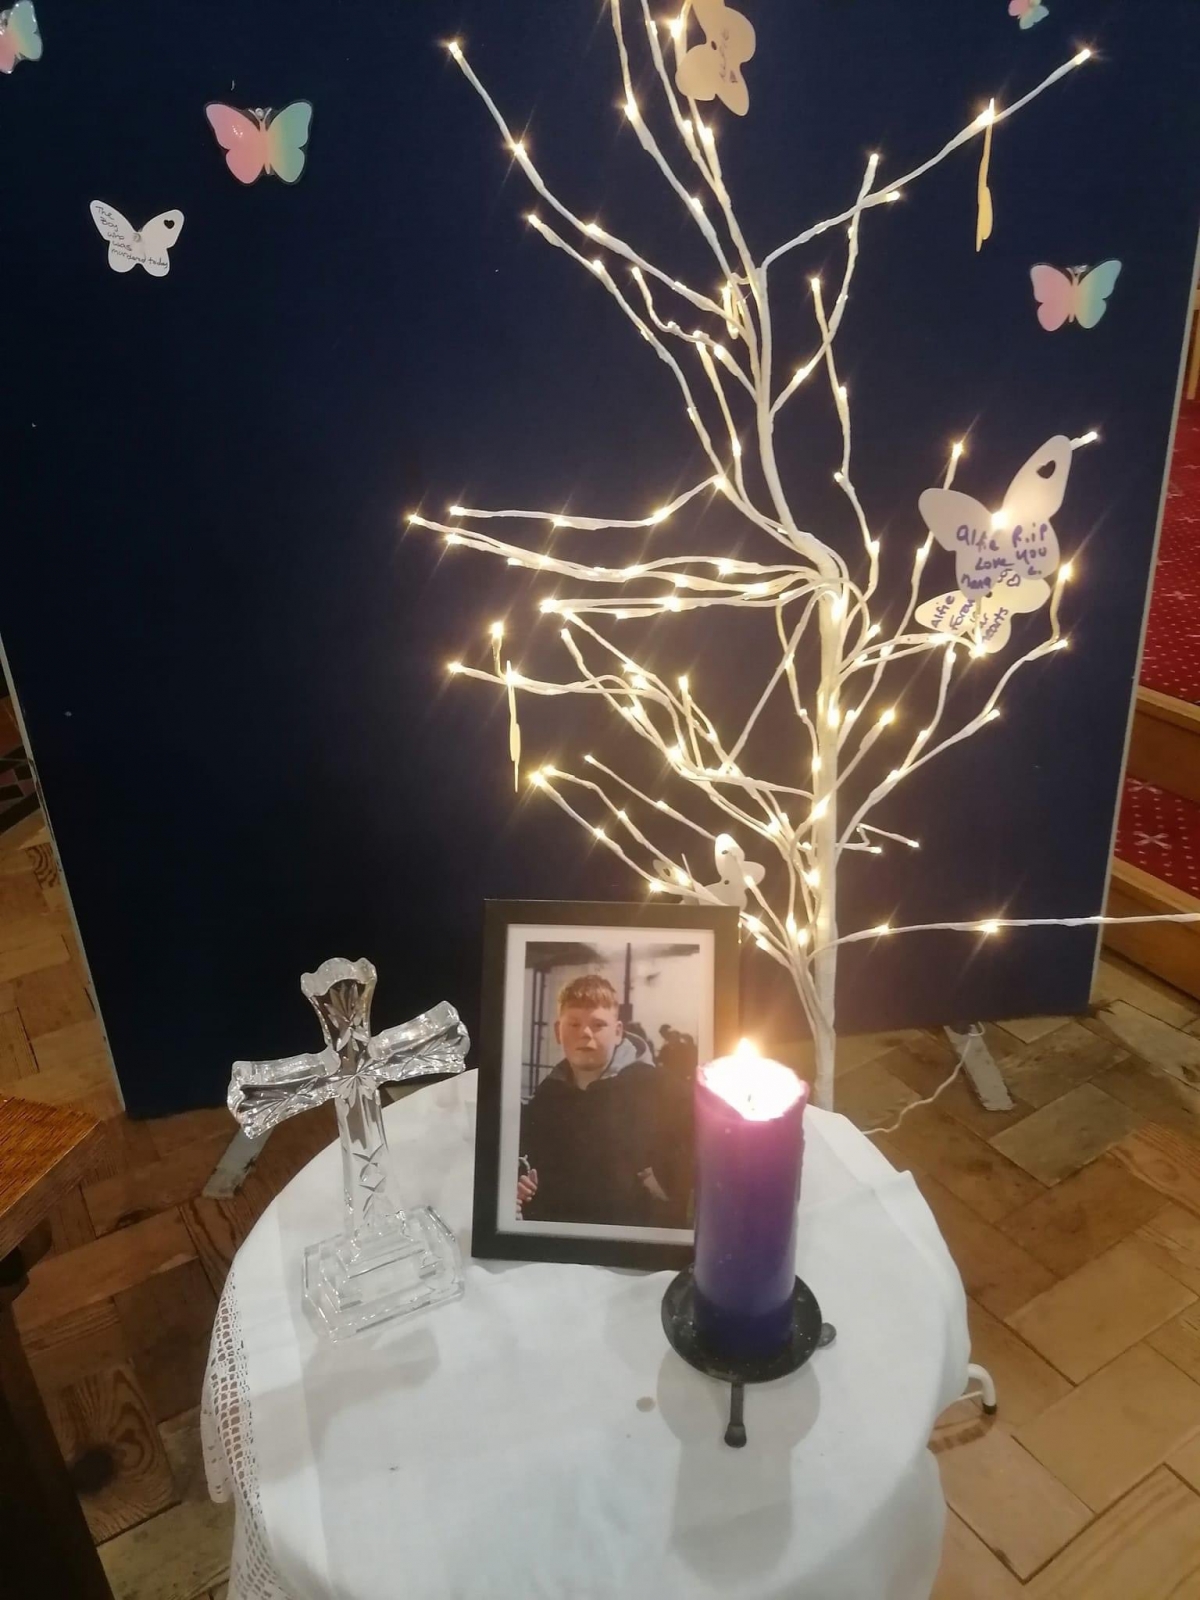 Church helps grieving group after Alfie Lewis stabbing tragedy